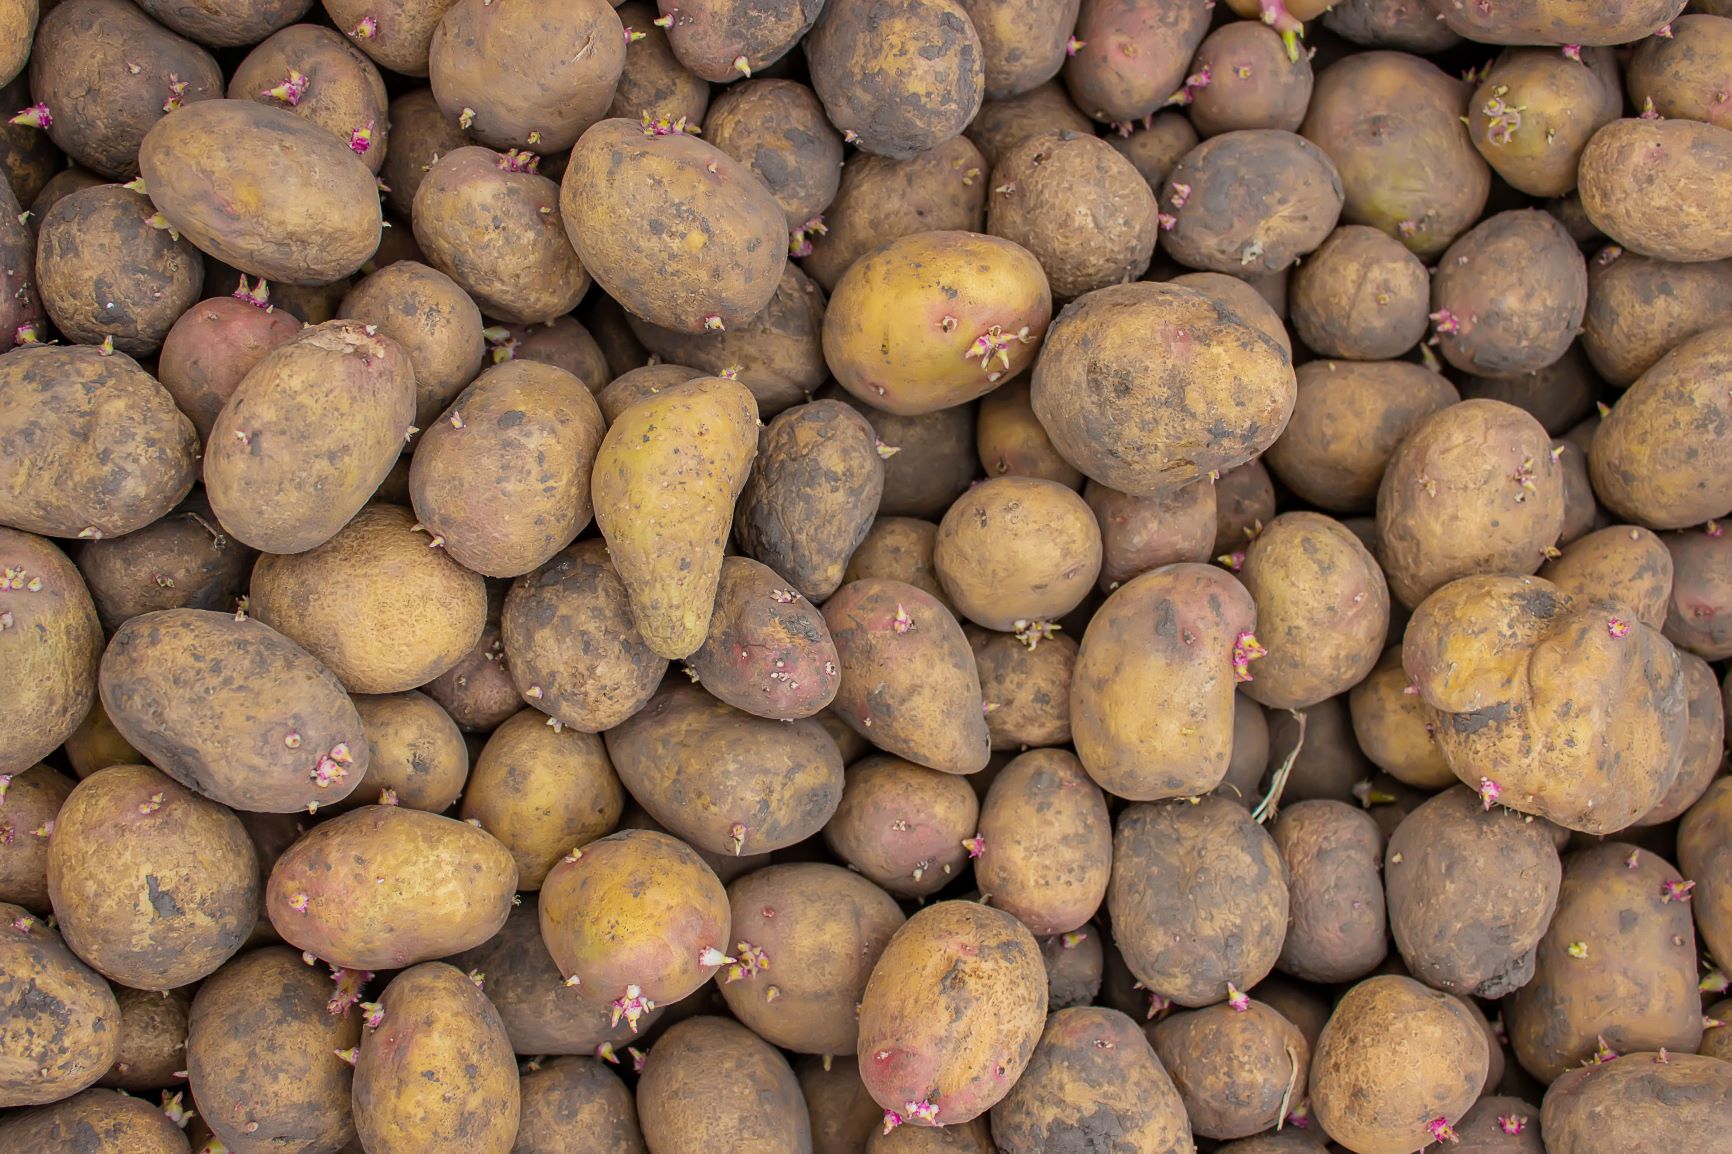 potatoes-for-planting-on-a-farm-in-a-box-2022-07-12-05-59-58-utc